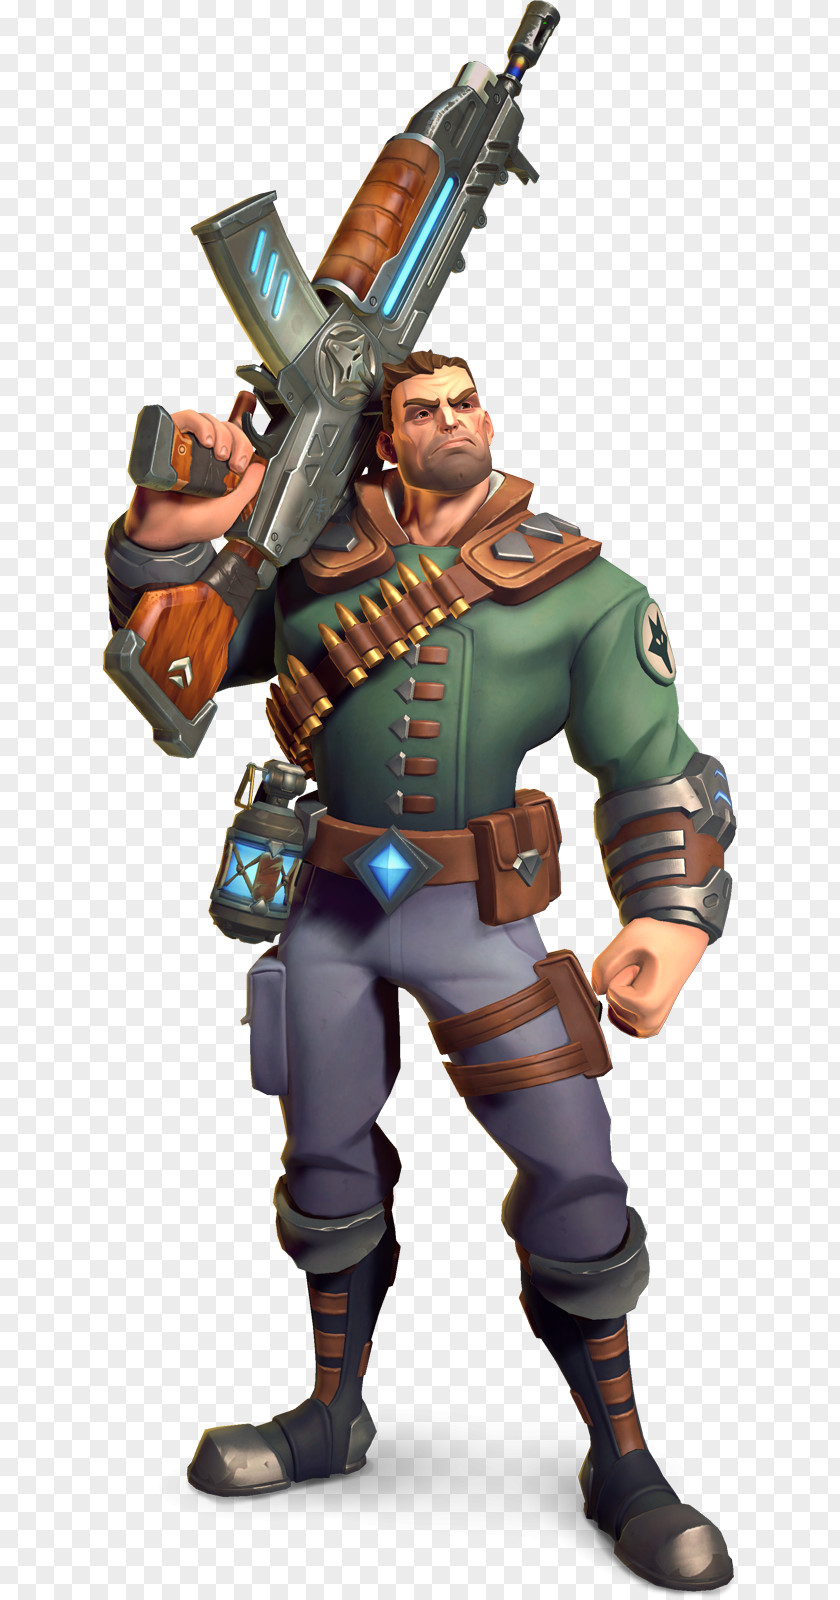 Paladins Smite Overwatch Tribes: Ascend Game PNG Game, Fortnite, Fortnite character illustration clipart PNG